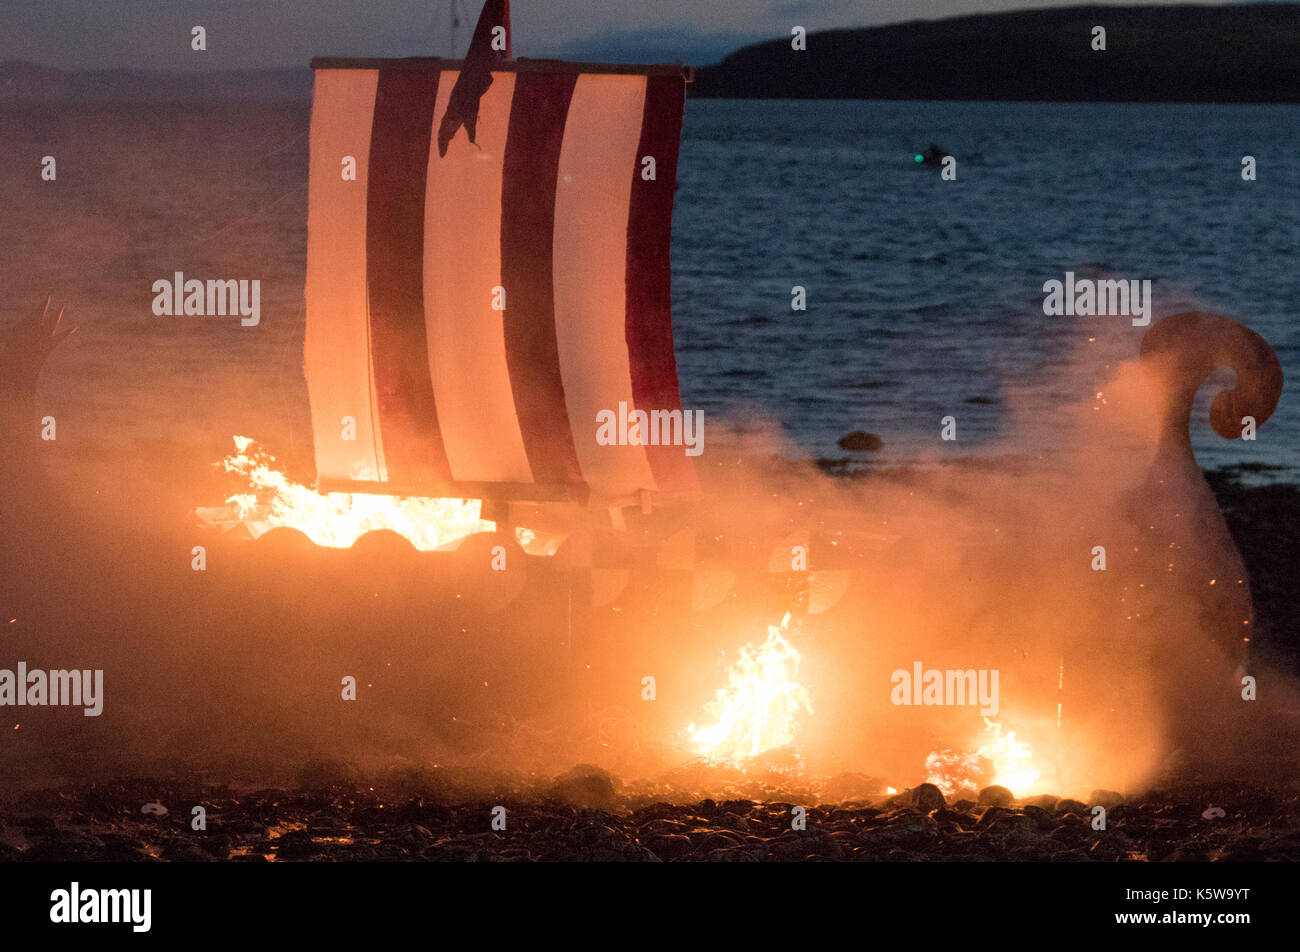 Burning a Viking longboat or longship in Largs, Scotland, UK.  September, 201. The Battle of Largs (2 October 1263) The Re-enactment commemorative event by the Swords of Dalriada a 13th Century living history group.  It was an indecisive engagement between the kingdoms of Norway and Scotland, on the Firth of Clyde near Largs, Scotland. The conflict formed part of the Norwegian expedition against Scotland in 1263, in which Haakon Haakonarson, King of Norway attempted to reassert Norwegian sovereignty over the western seaboard of Scotland. Stock Photo